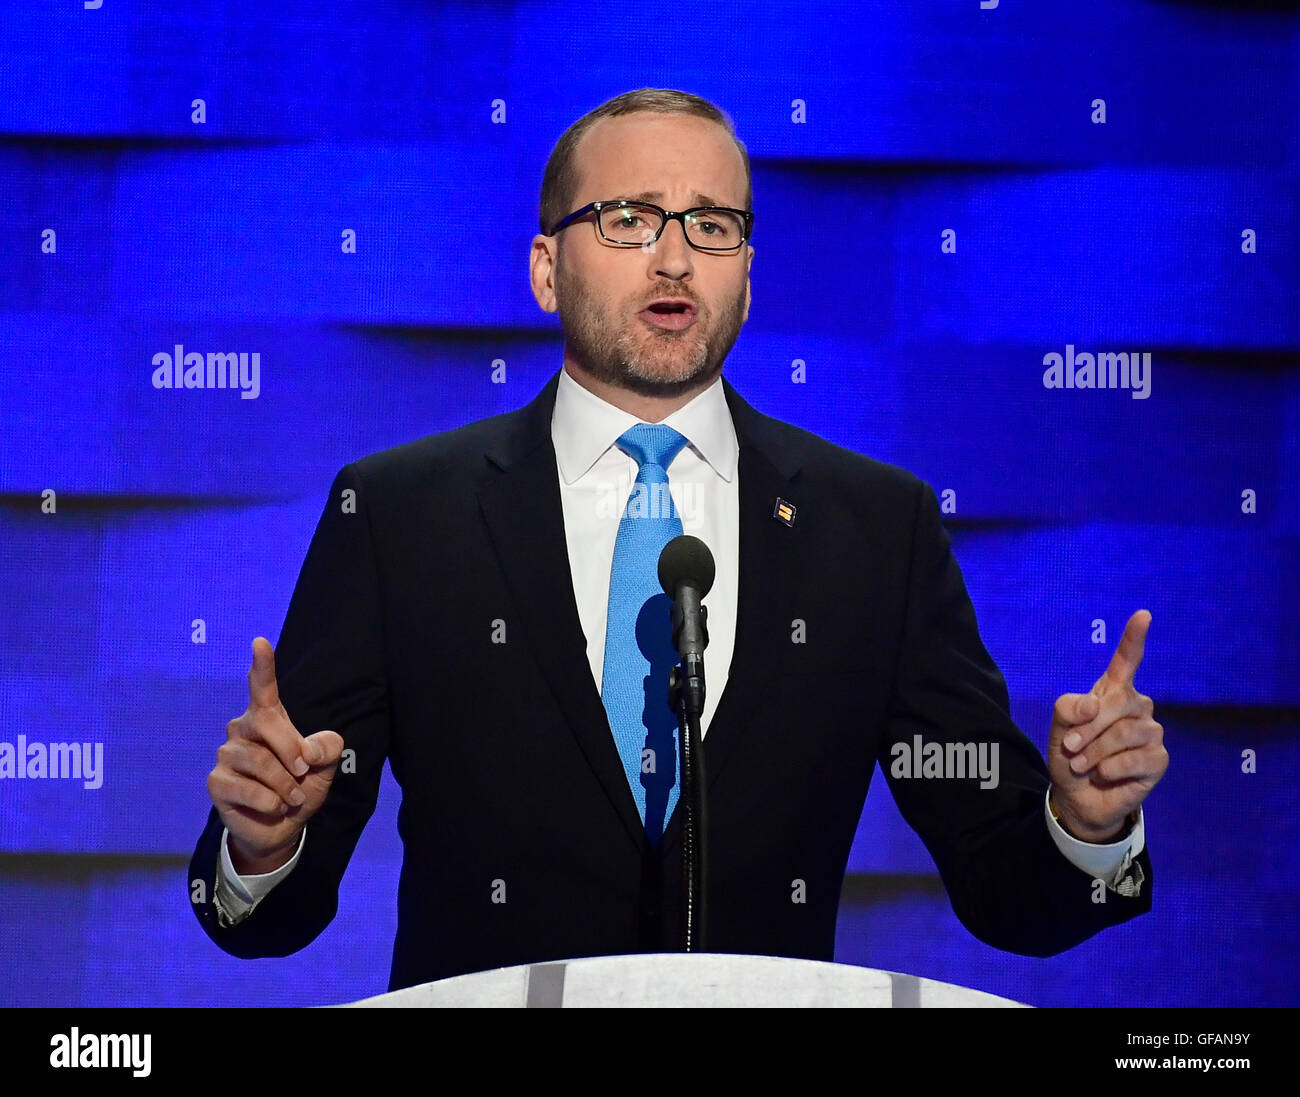 Philadelphia, Us. 28th July, 2016. Chad Griffin, President, Human Rights Campaign, makes remarks during the fourth session of the 2016 Democratic National Convention at the Wells Fargo Center in Philadelphia, Pennsylvania on Thursday, July 28, 2016. Credit: Ron Sachs/CNP (RESTRICTION: NO New York or New Jersey Newspapers or newspapers within a 75 mile radius of New York City) - NO WIRE SERVICE - © dpa/Alamy Live News Stock Photo